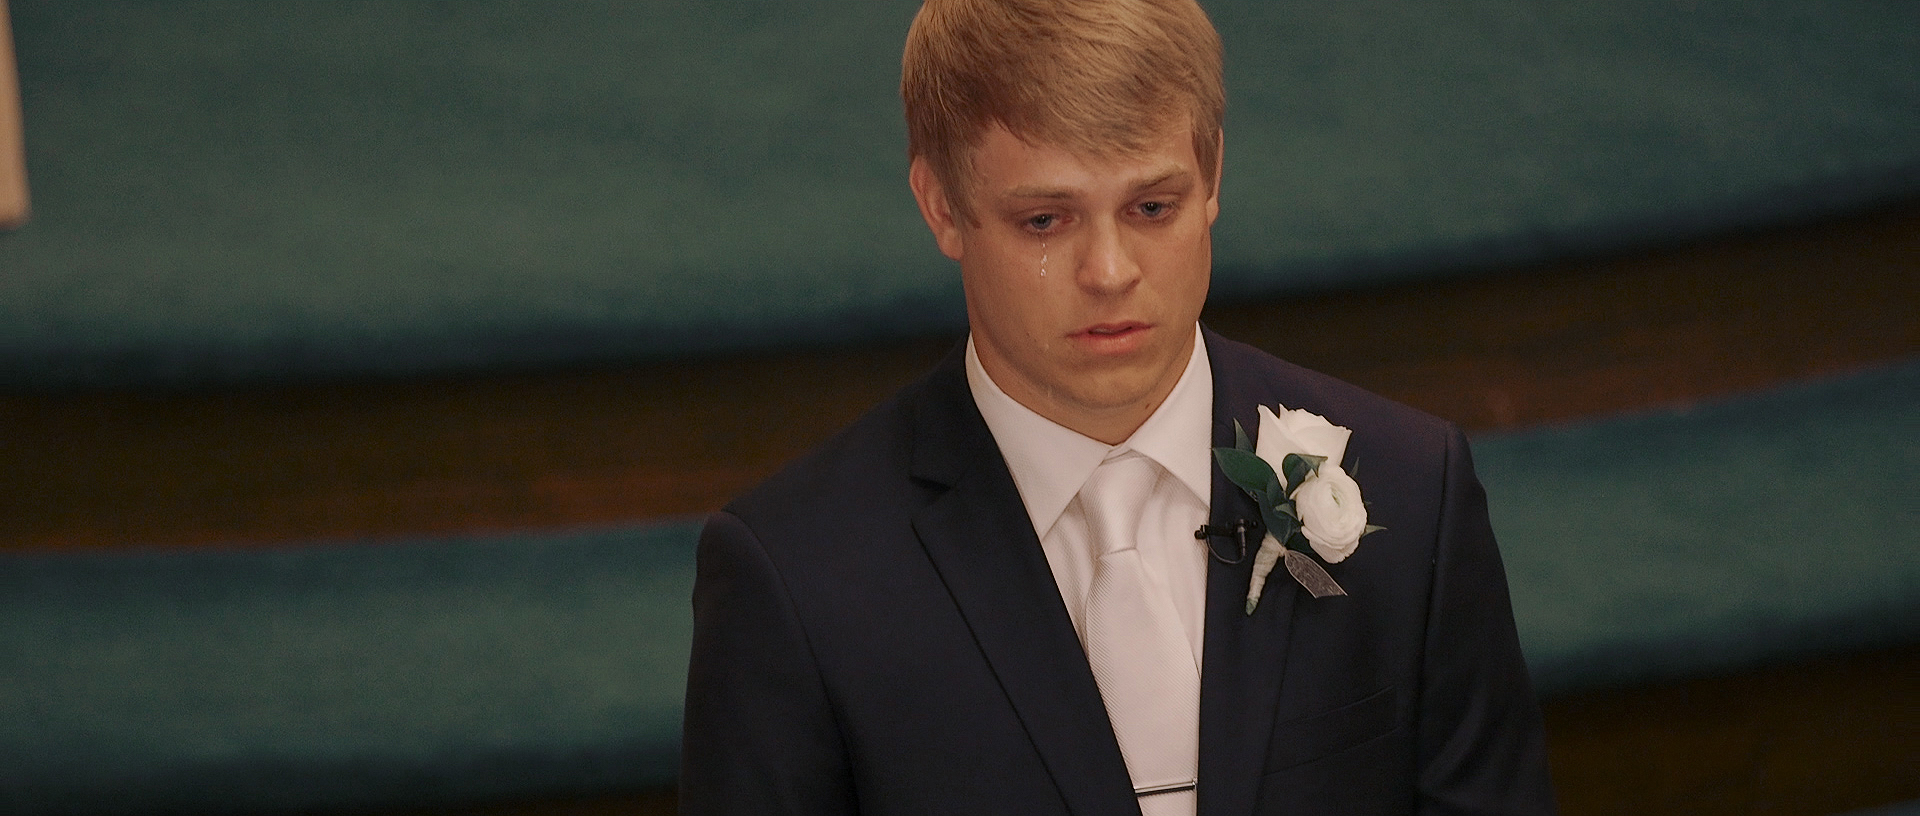 groom-crying-when-seeing-bride